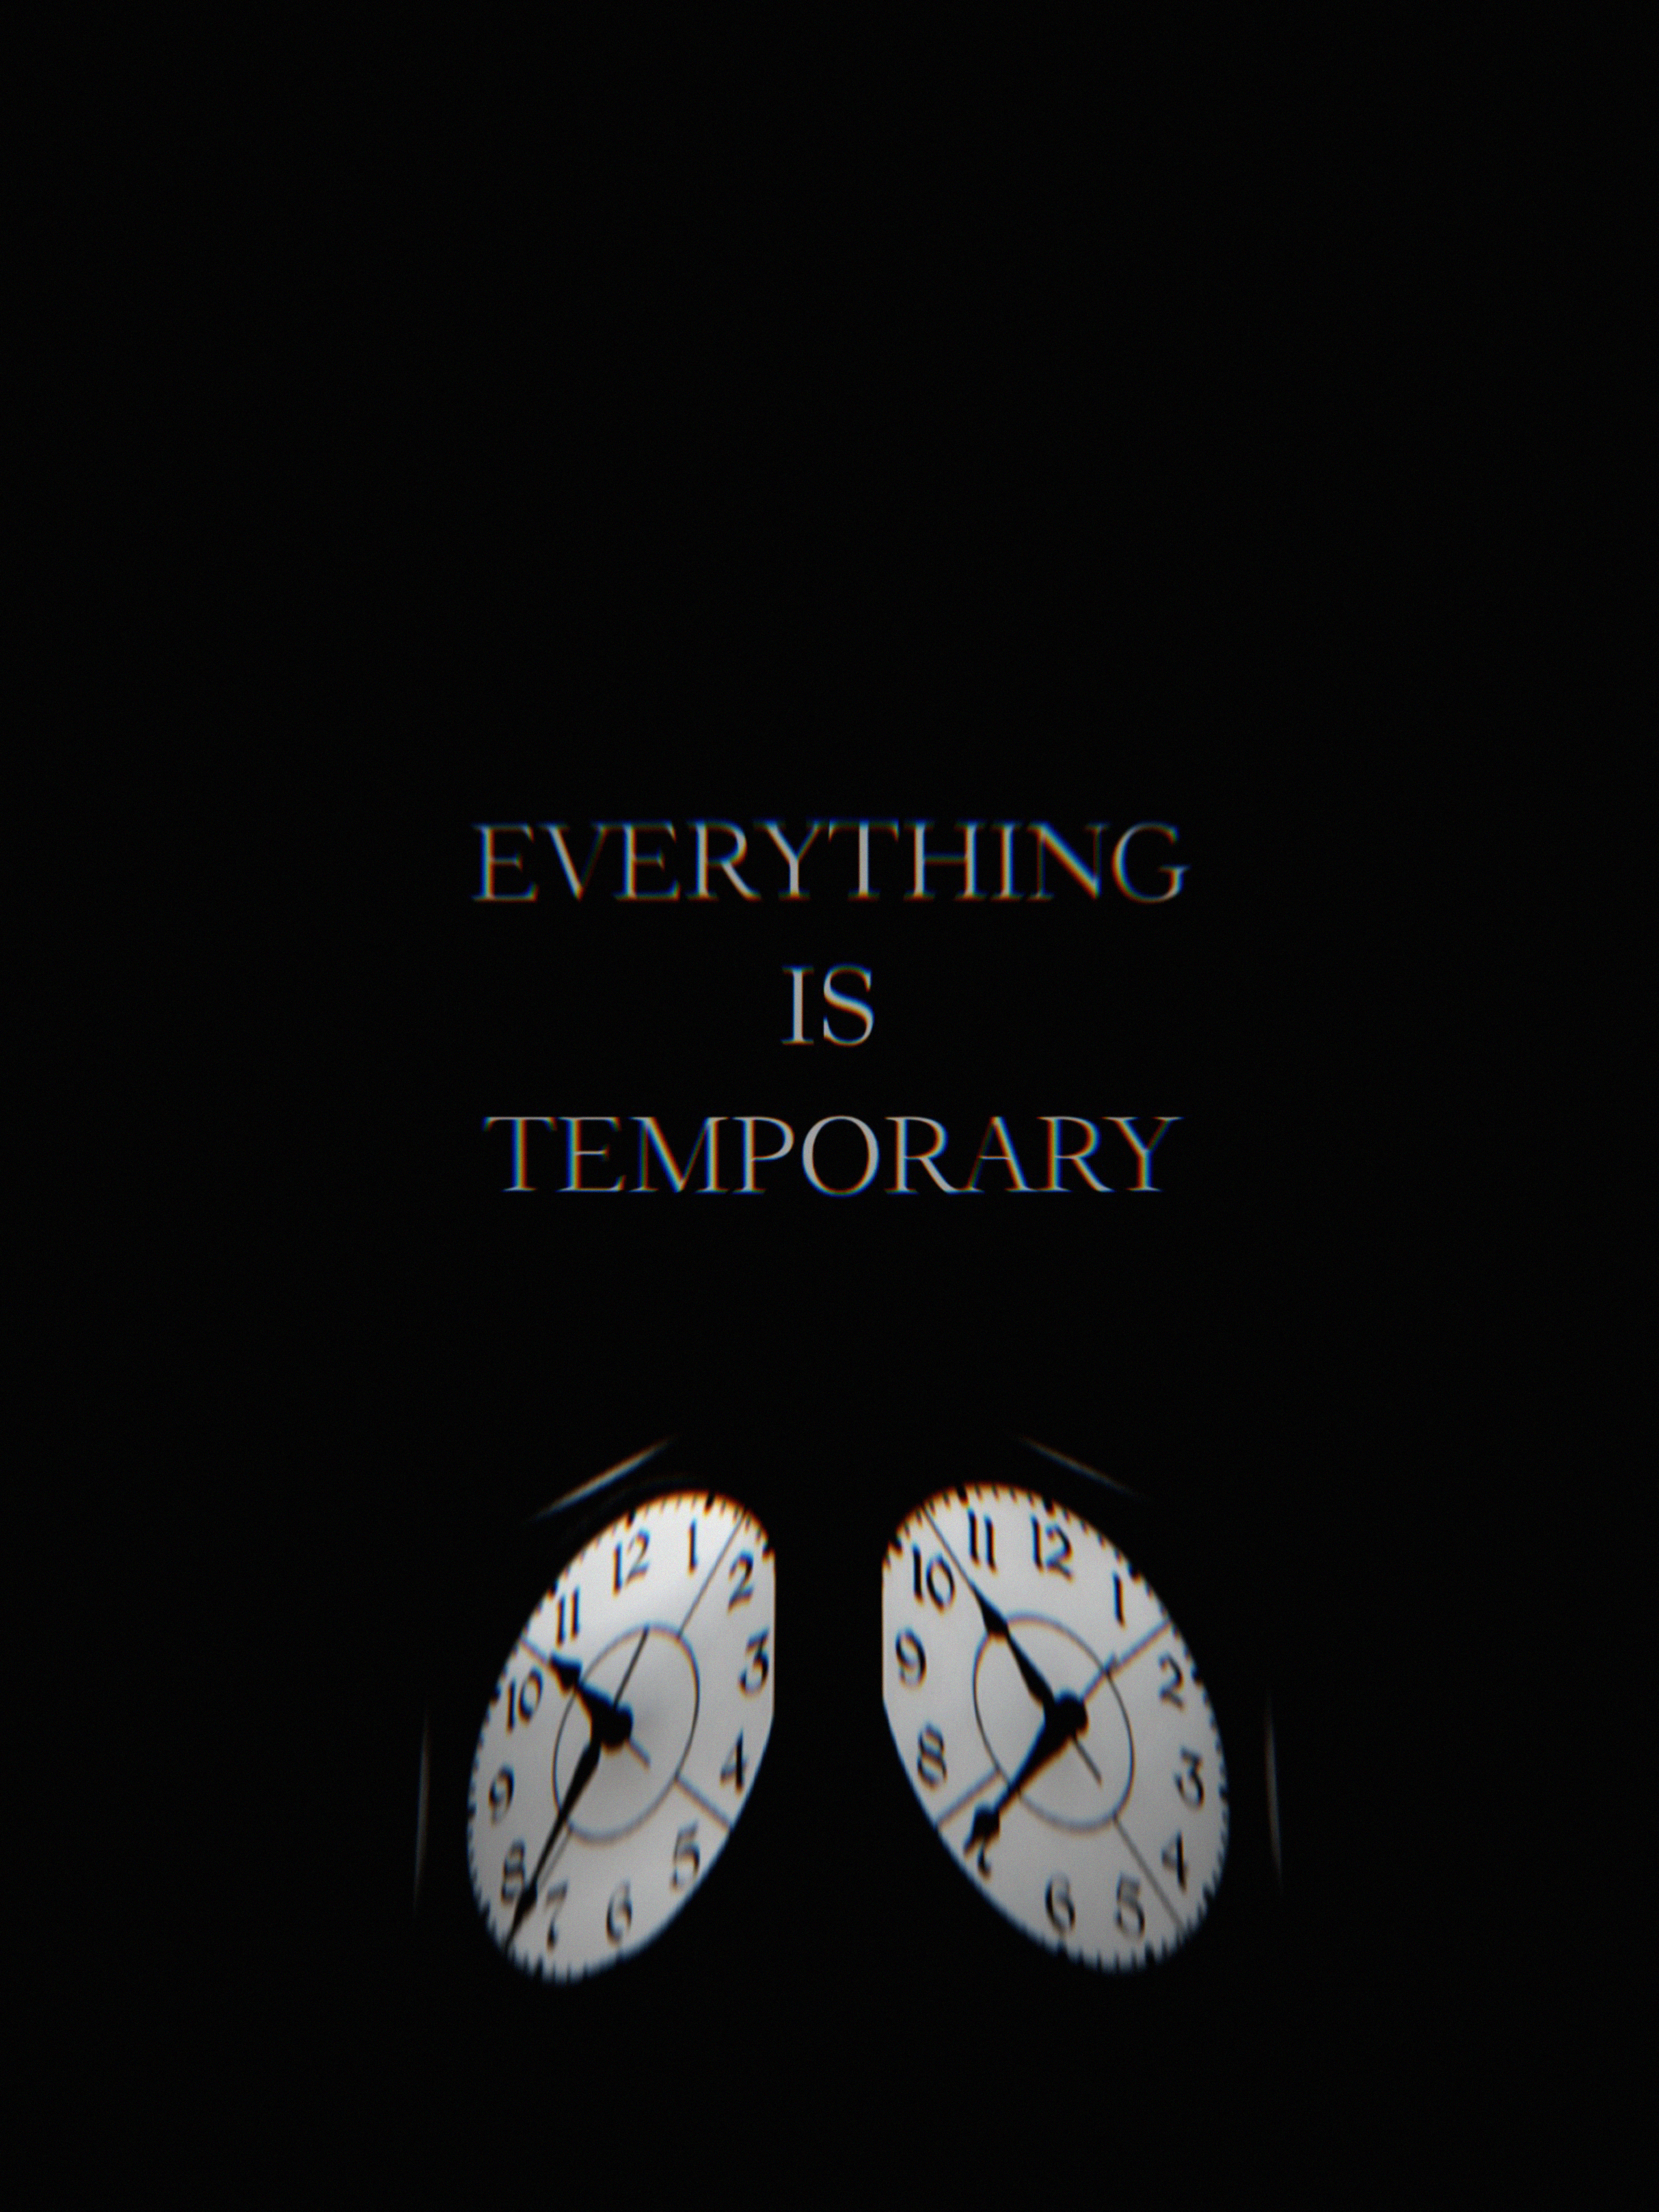 time, life, words, it's time, clock, glitch, temporary Aesthetic wallpaper